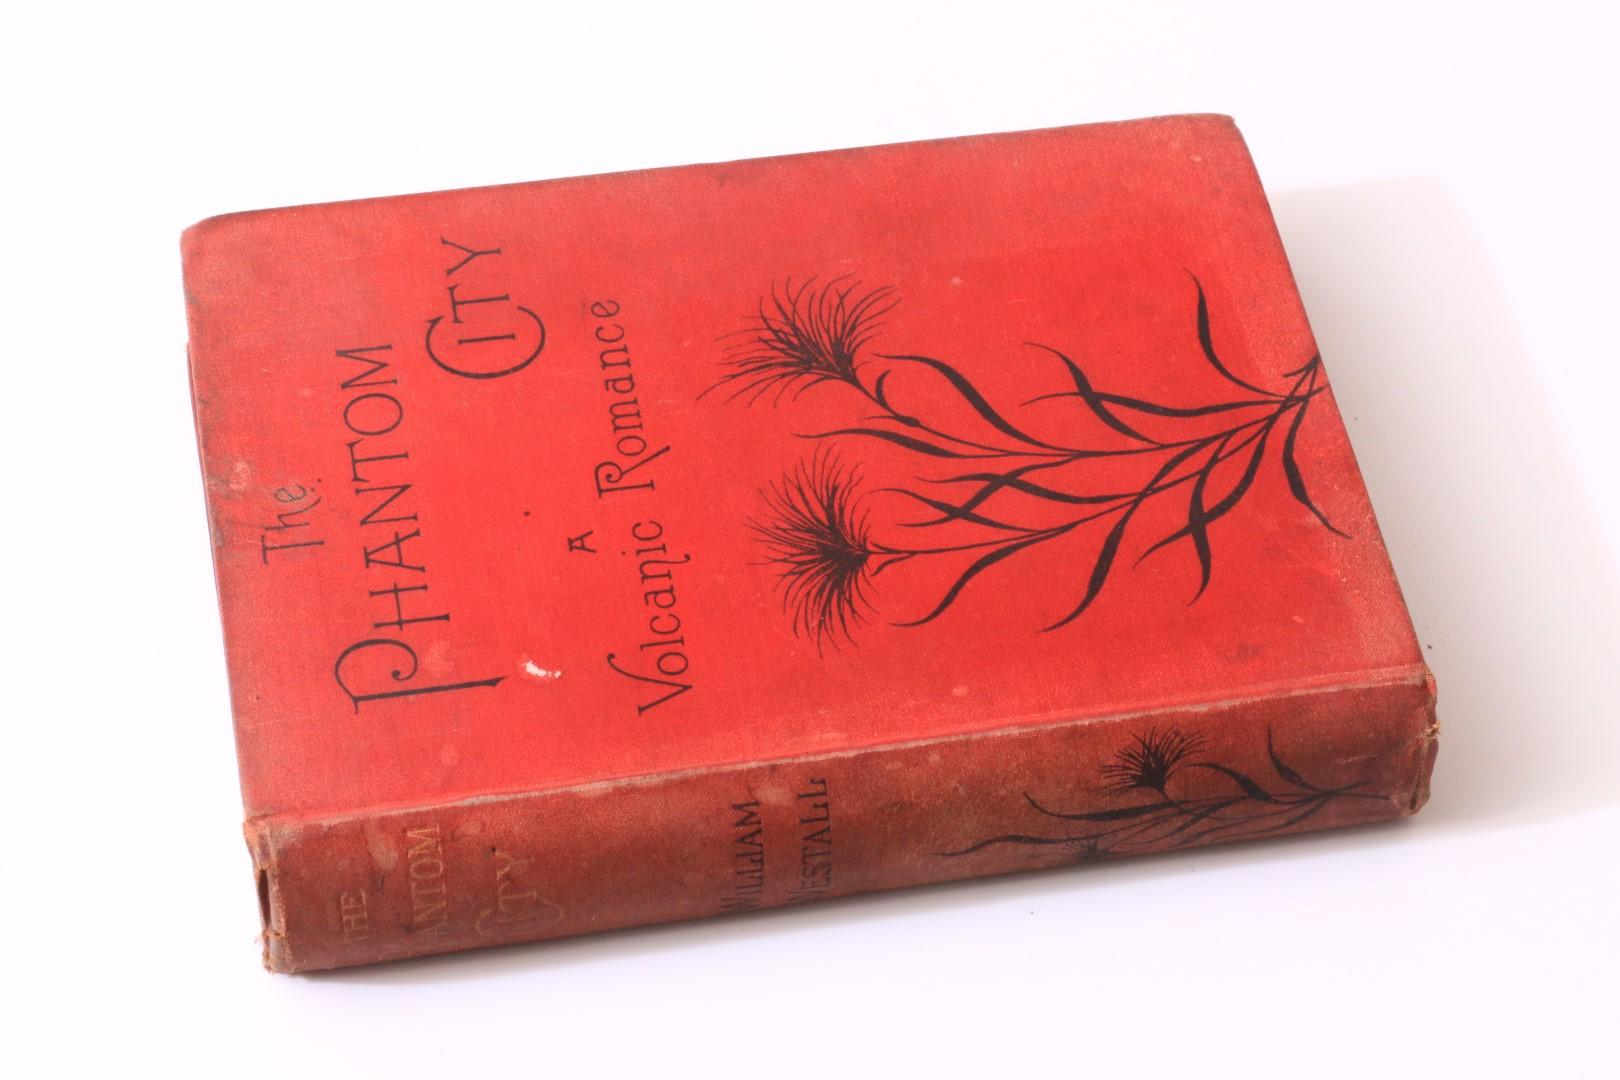 William Westall - The Phantom City: A Volcanic Romance - H. Rider Haggard's Copy - Cassell & Company, 1886, First Edition.